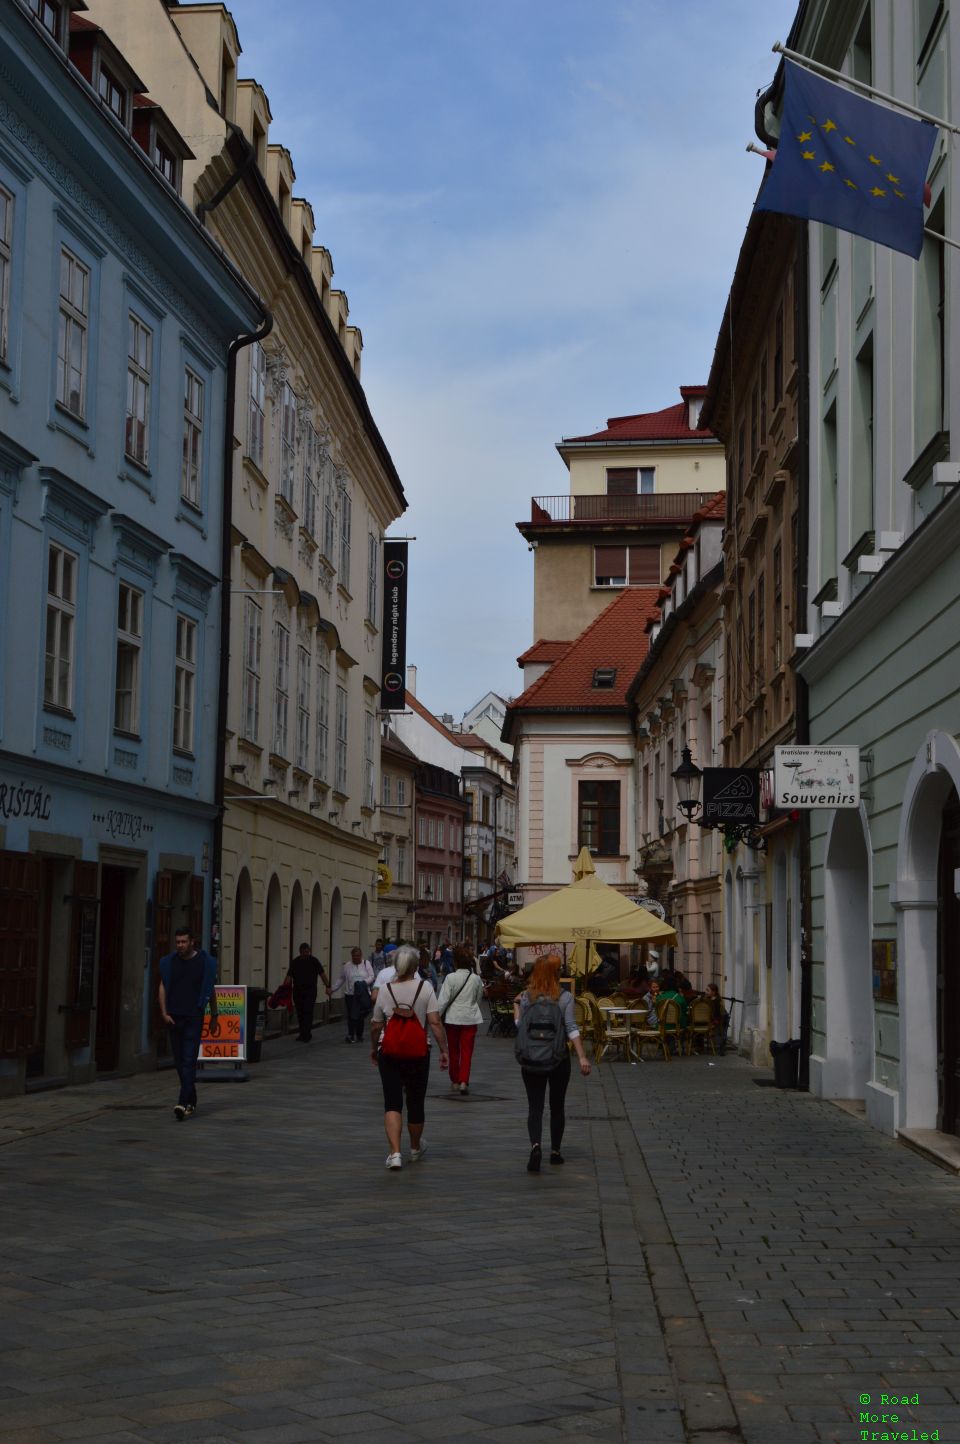 Walking Tour of Bratislava Castle and Old Town Bratislava - typical street in Old Town